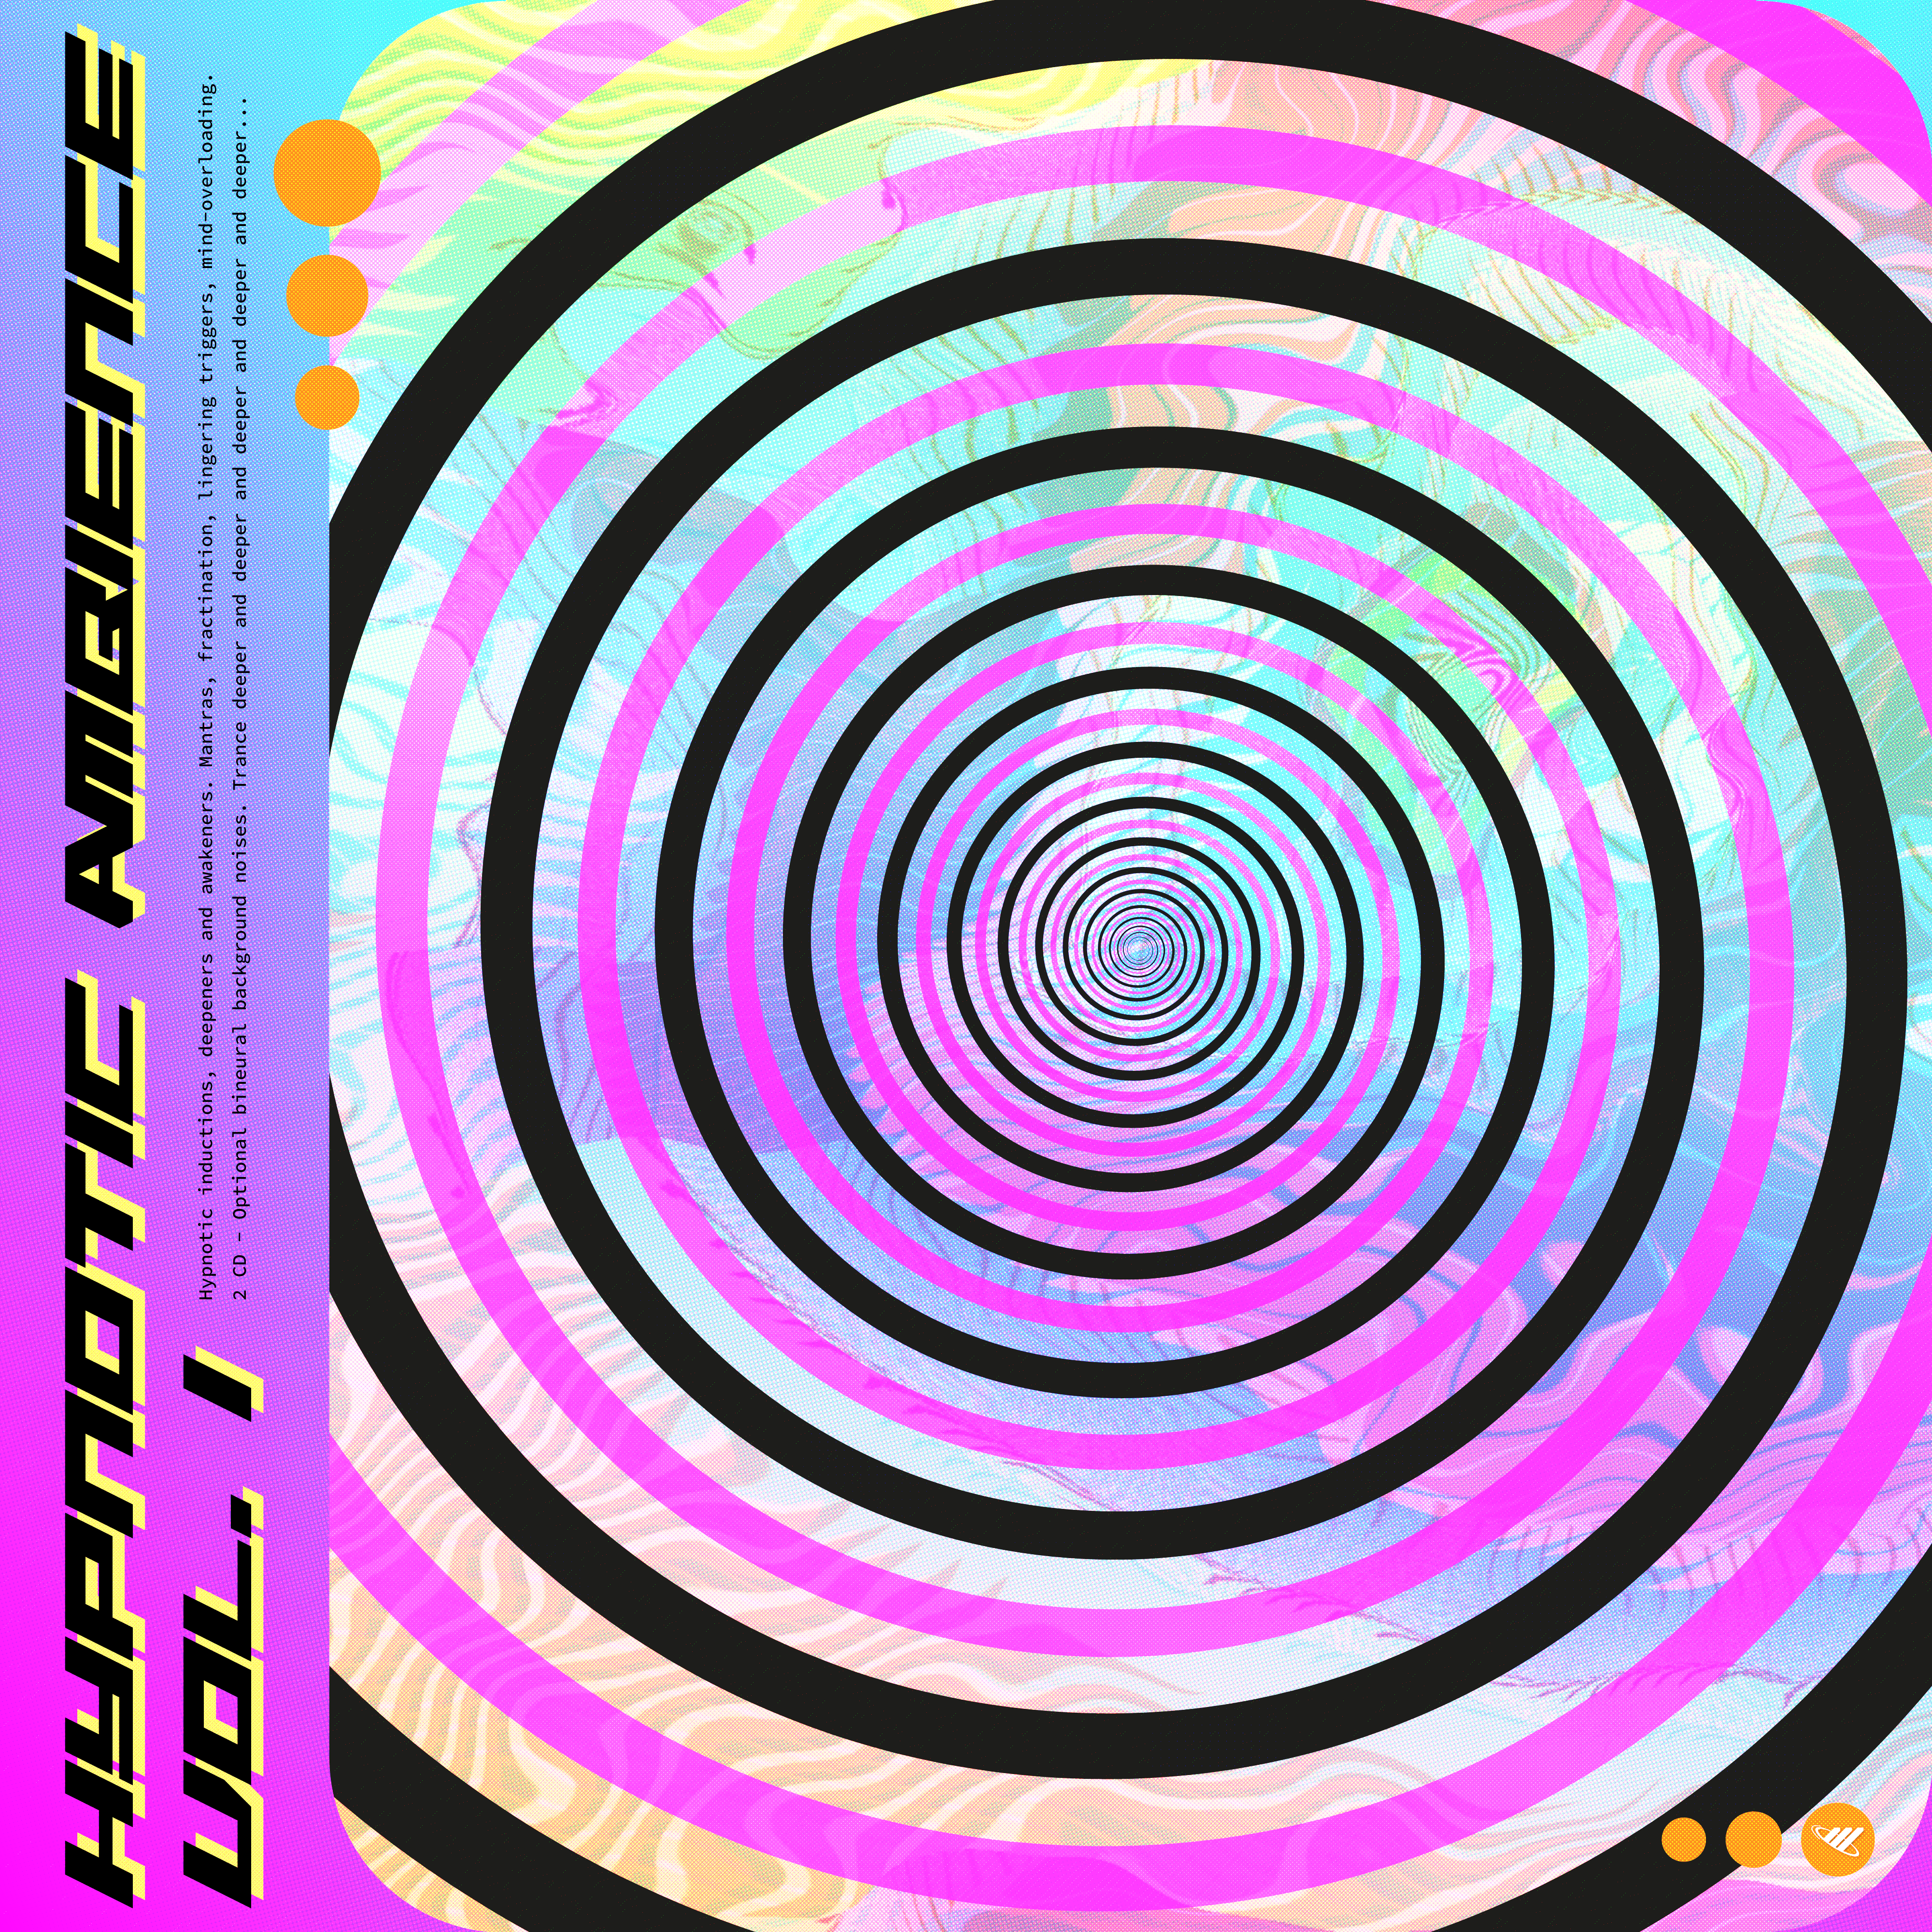 Fake CD cover with hypnotic spiral.